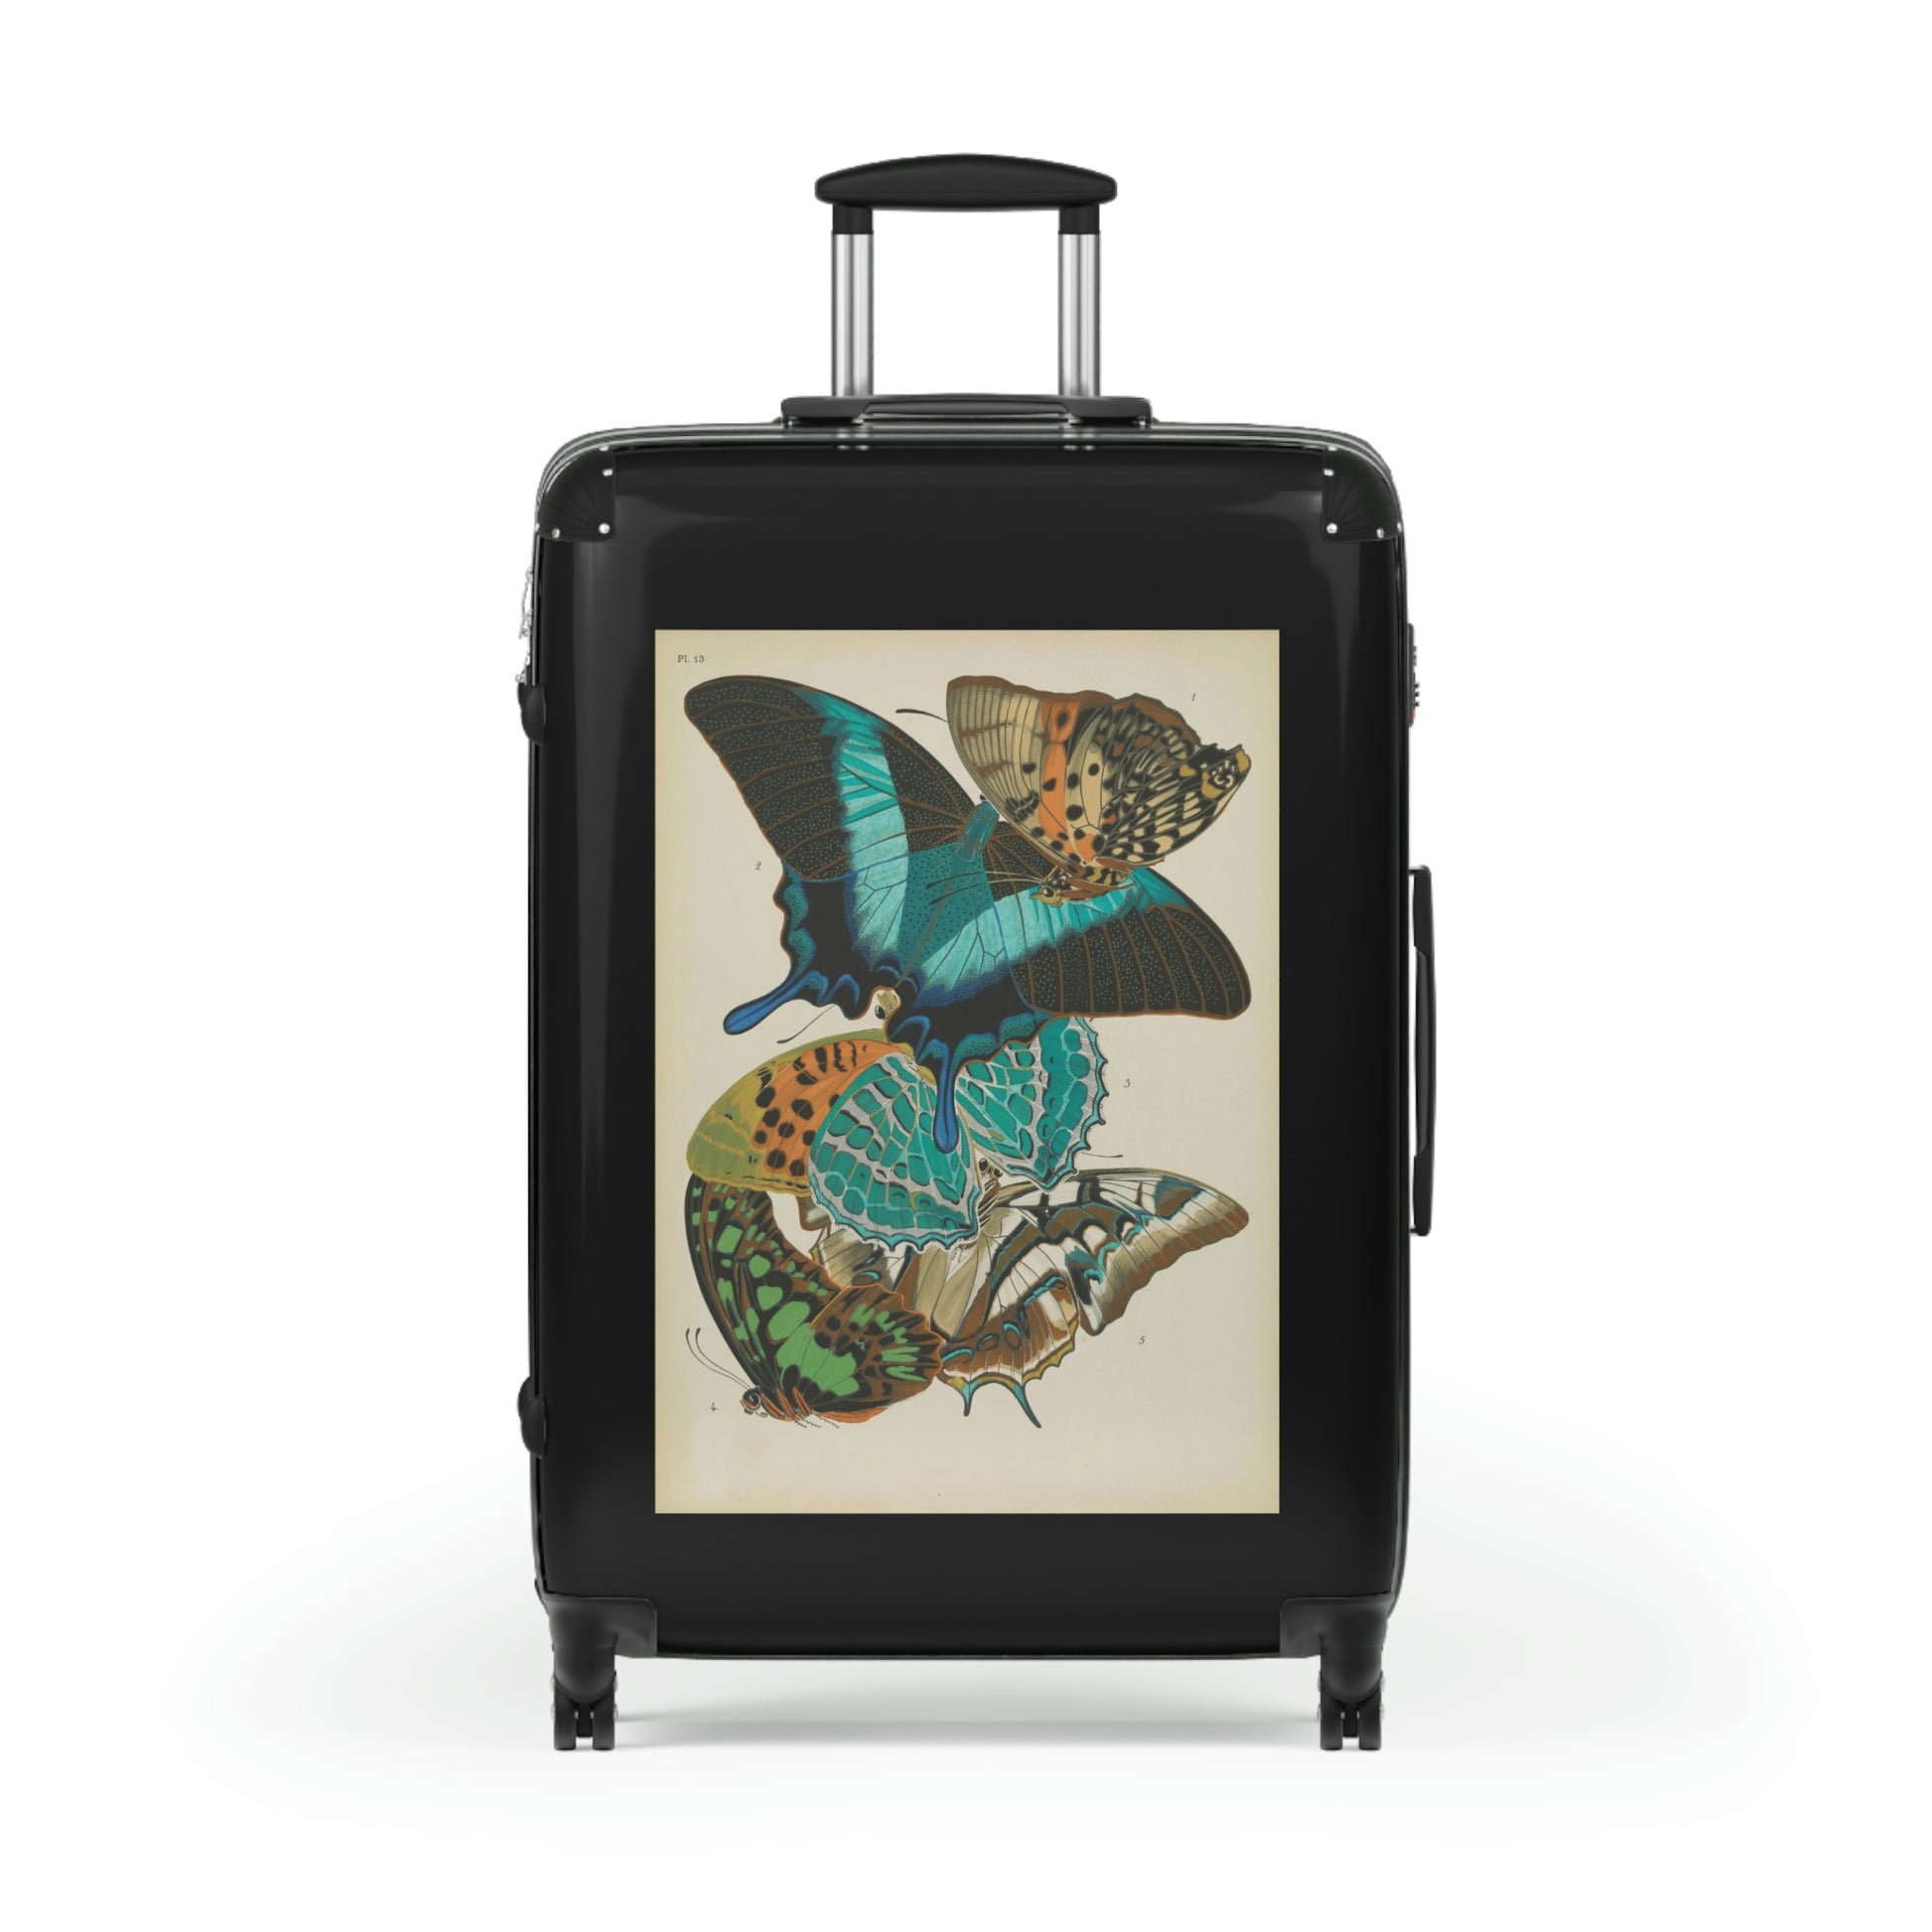 Getrott Butterflies Macrolepidopteran Rhopalocera Lepidoptera Turquoise Colors Cabin Suitcase Rolling Luggage Extended Storage Adjustable Telescopic Handle Double wheeled Polycarbonate Hard-shell Built-in Lock-Bags-Geotrott